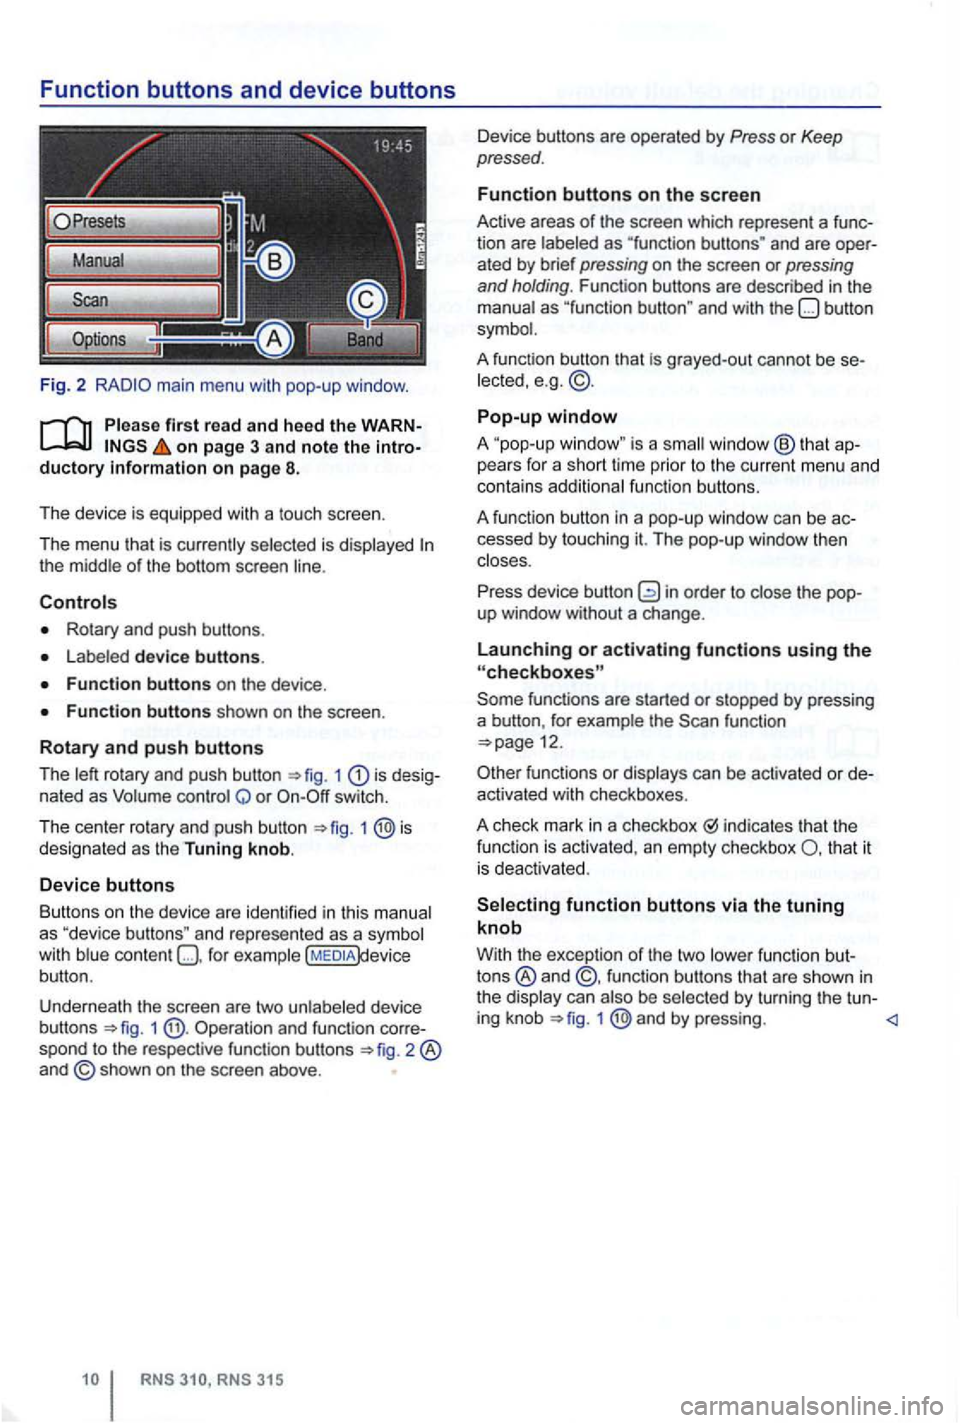 VOLKSWAGEN GOLF 2009  Owners Manual Function buttons and device buttons 
Fig. 2 
on page  3 and note the 
Rotary  and push  buttons . 
device buttons. 
1 is nated as Q or switch. 
T he  cen t
er rotary  and  push  button 1 designated  a